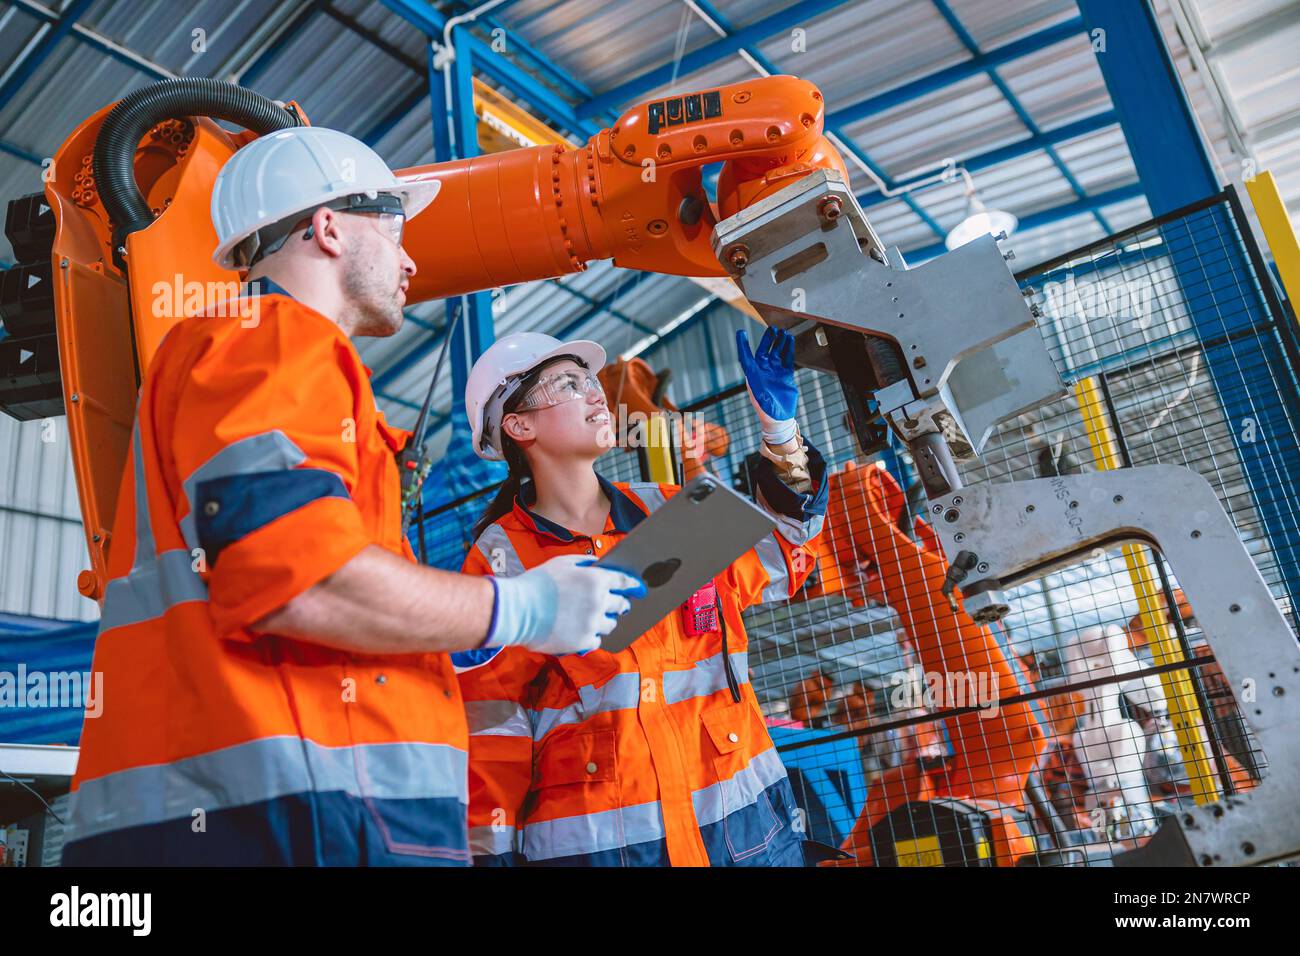 engineer teamwork working in automation factory service program robotic arm welding assembly Stock Photo